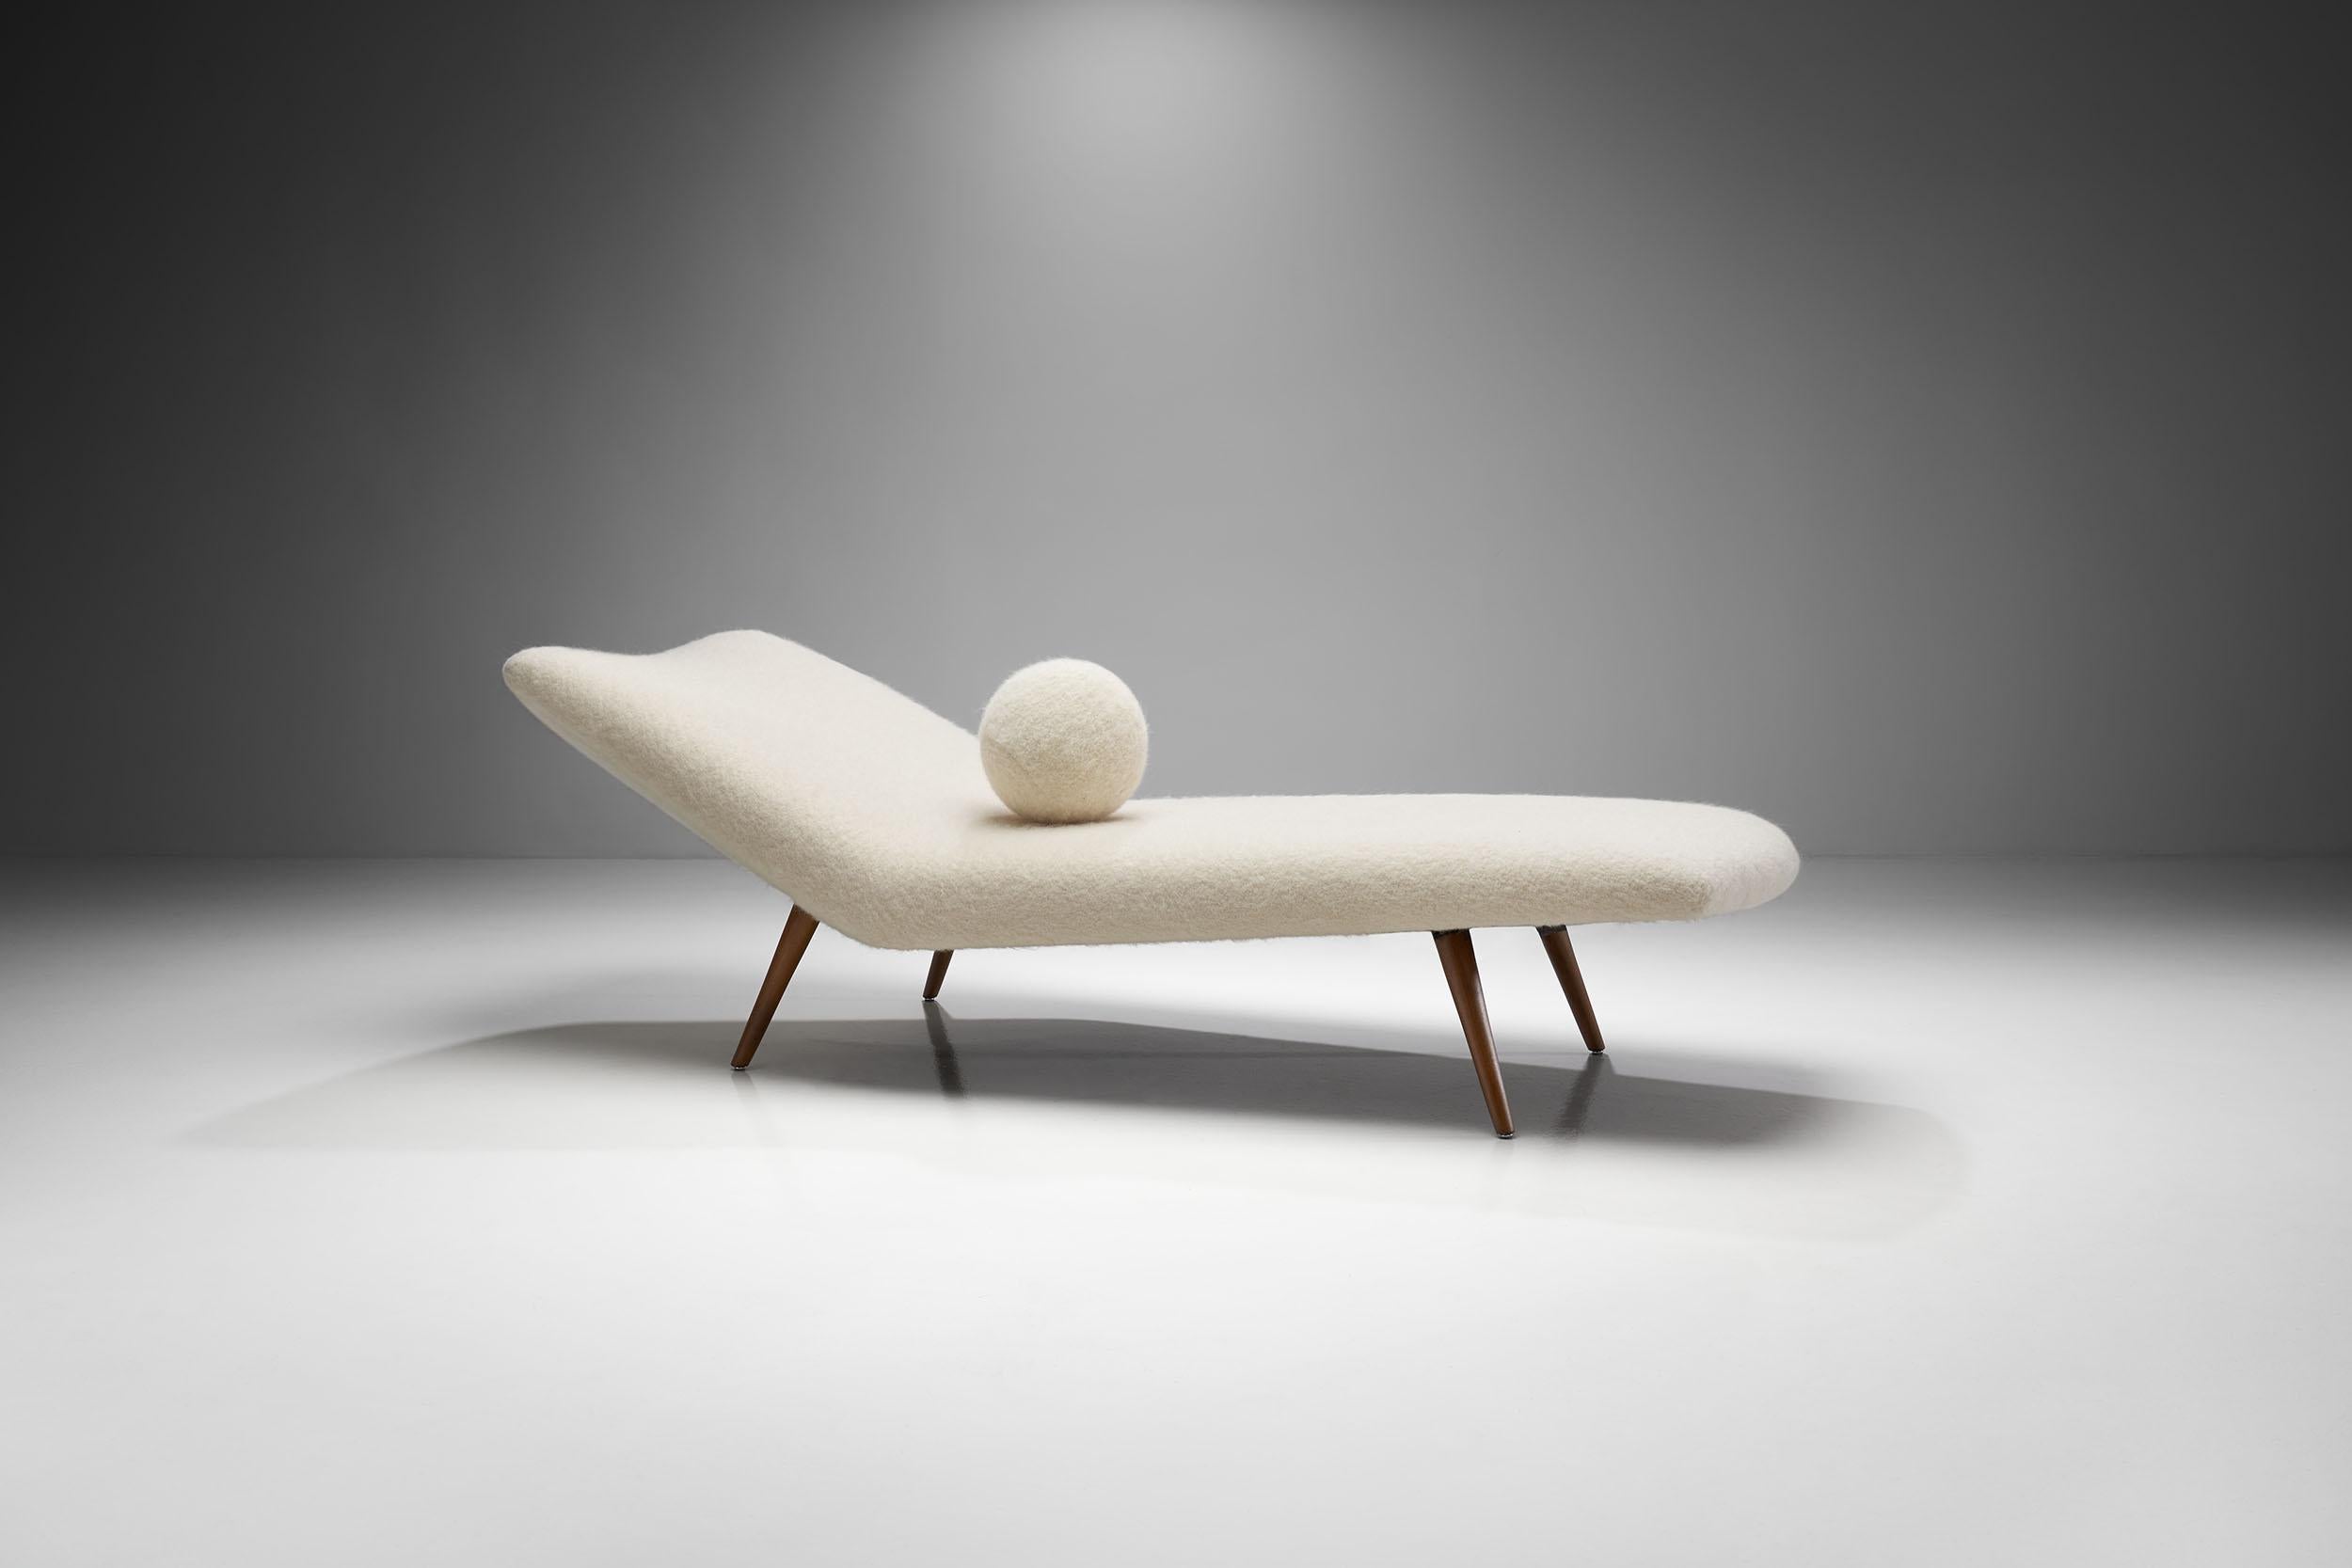 This eye-catching daybed was designed by Theo Ruth in 1947 and manufactured in a limited series. The key words around this model are quality, comfort and understated elegance.

The slender, slightly conical wooden legs are made from patinated